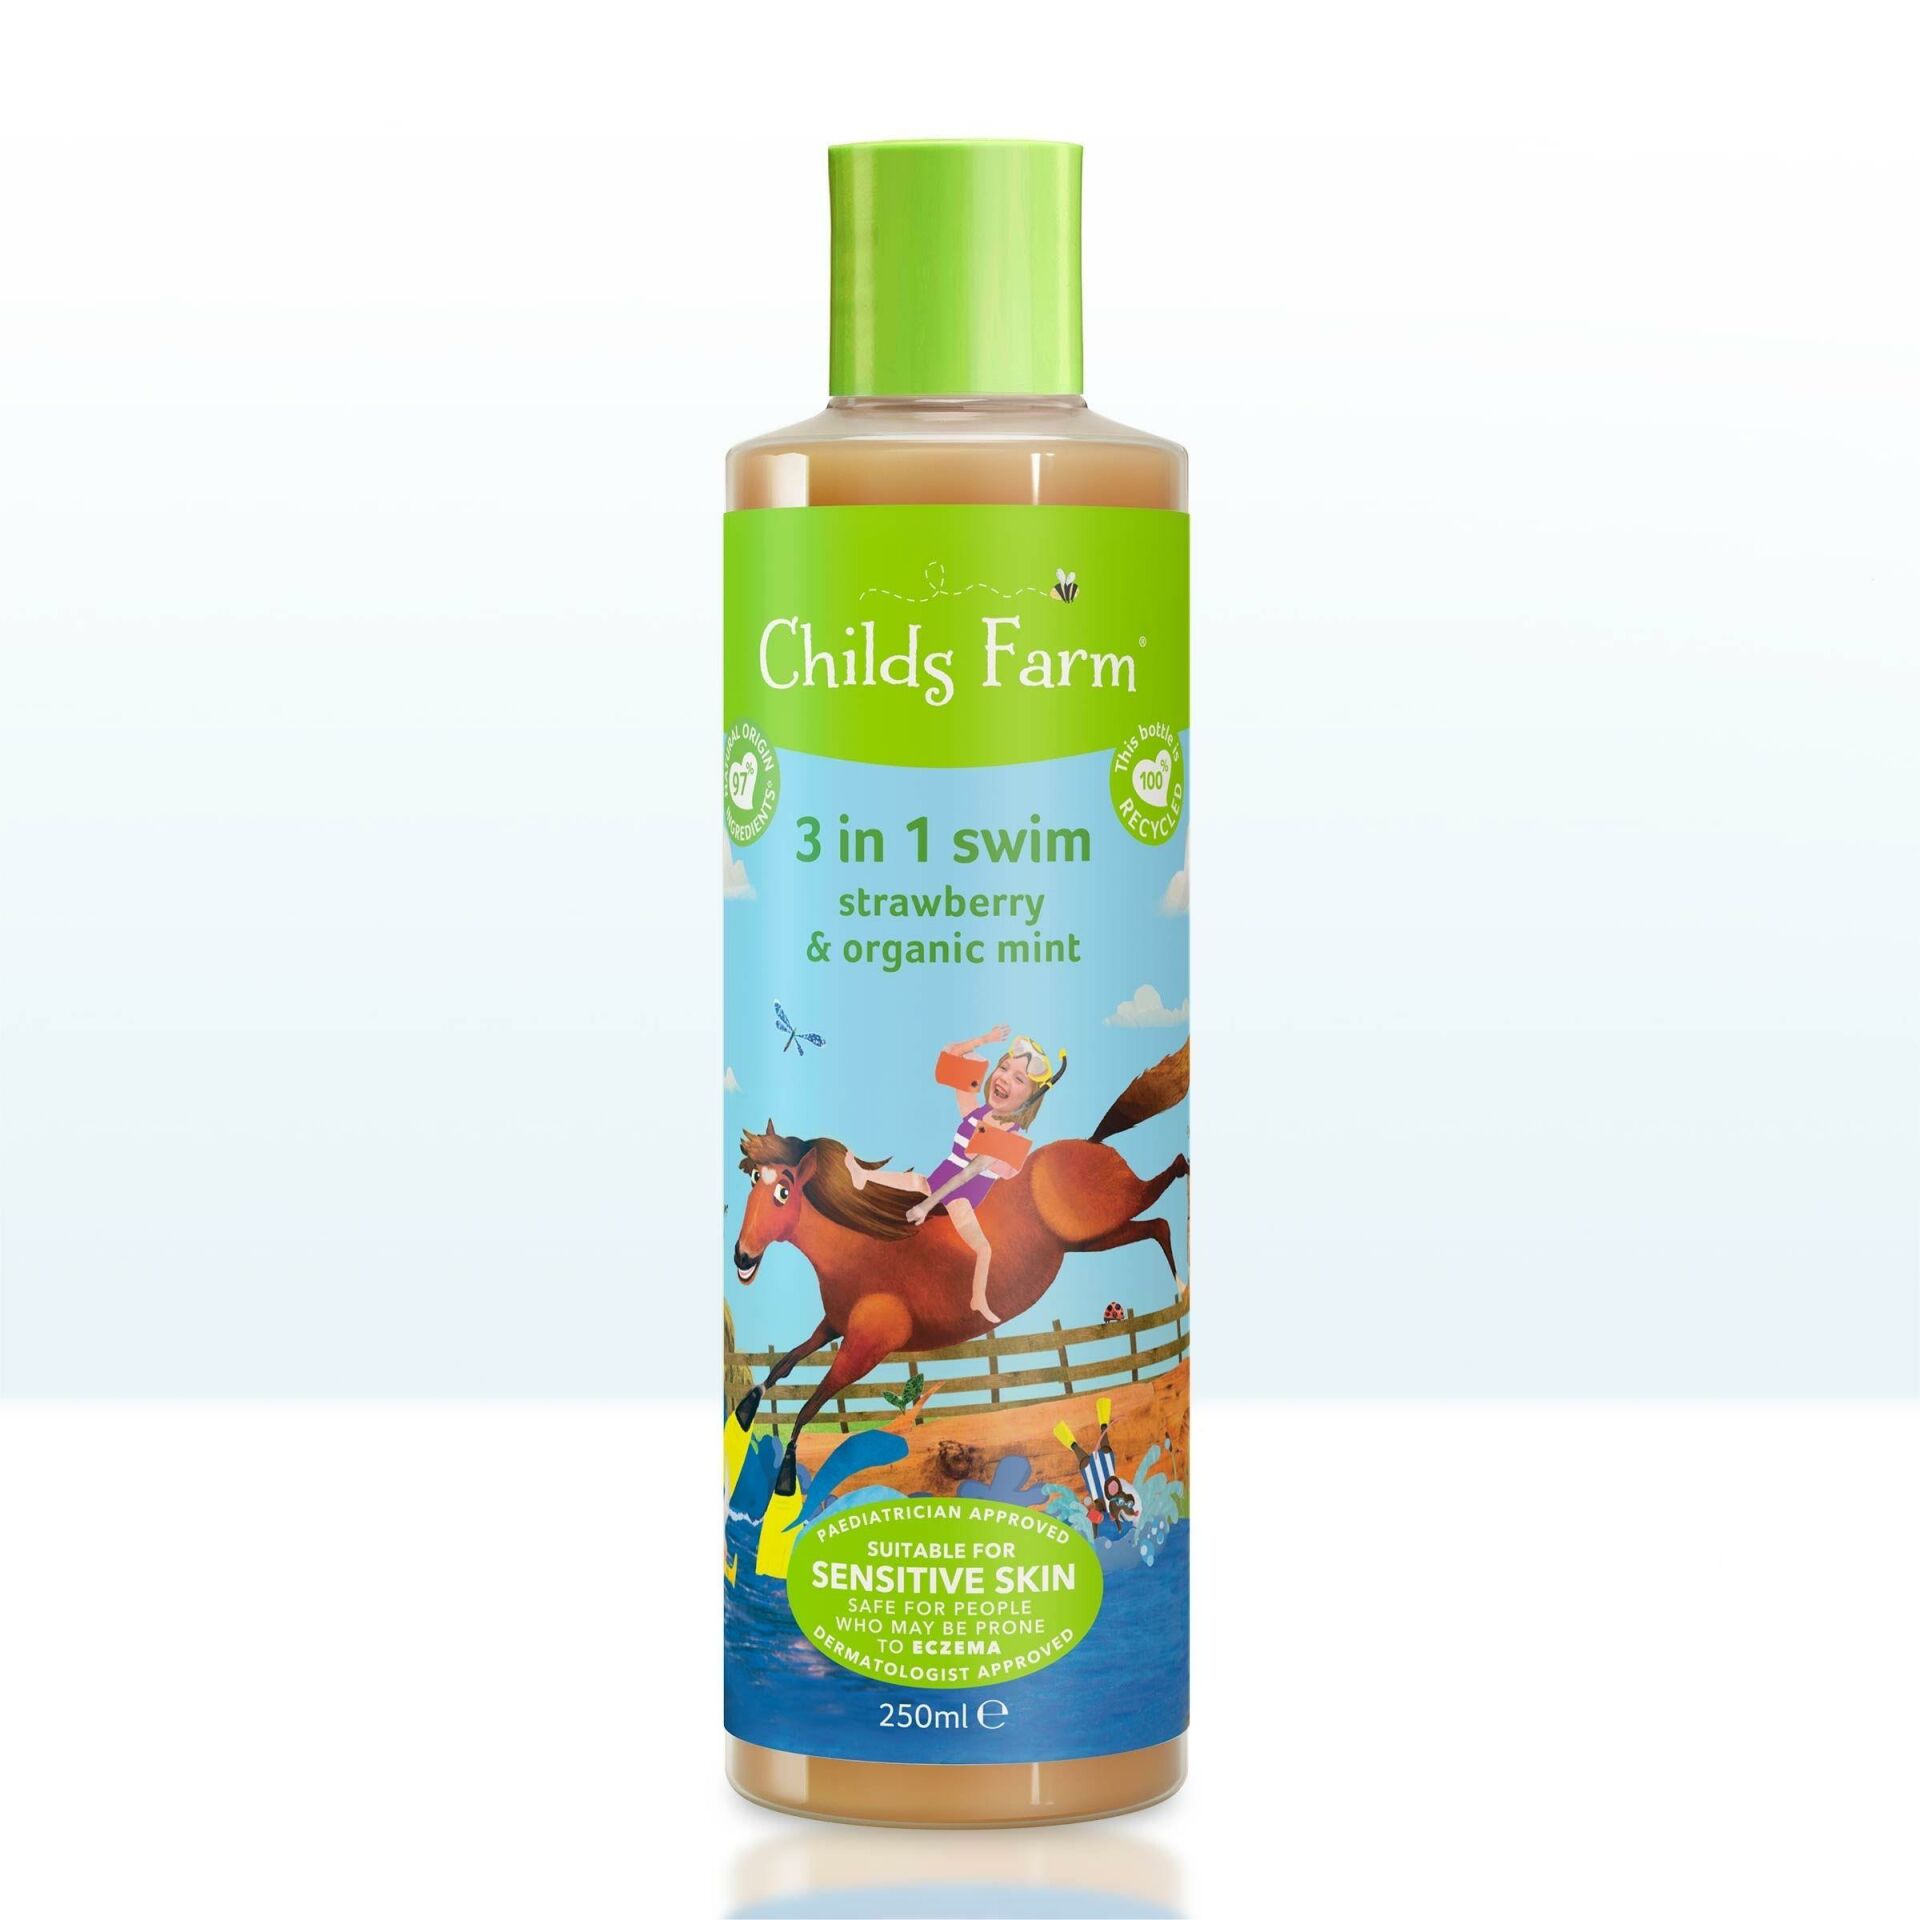 Childs Farm Strawberry and Organic Mint Extract 3 in 1 After Swimming Children's Shampoo 250ml